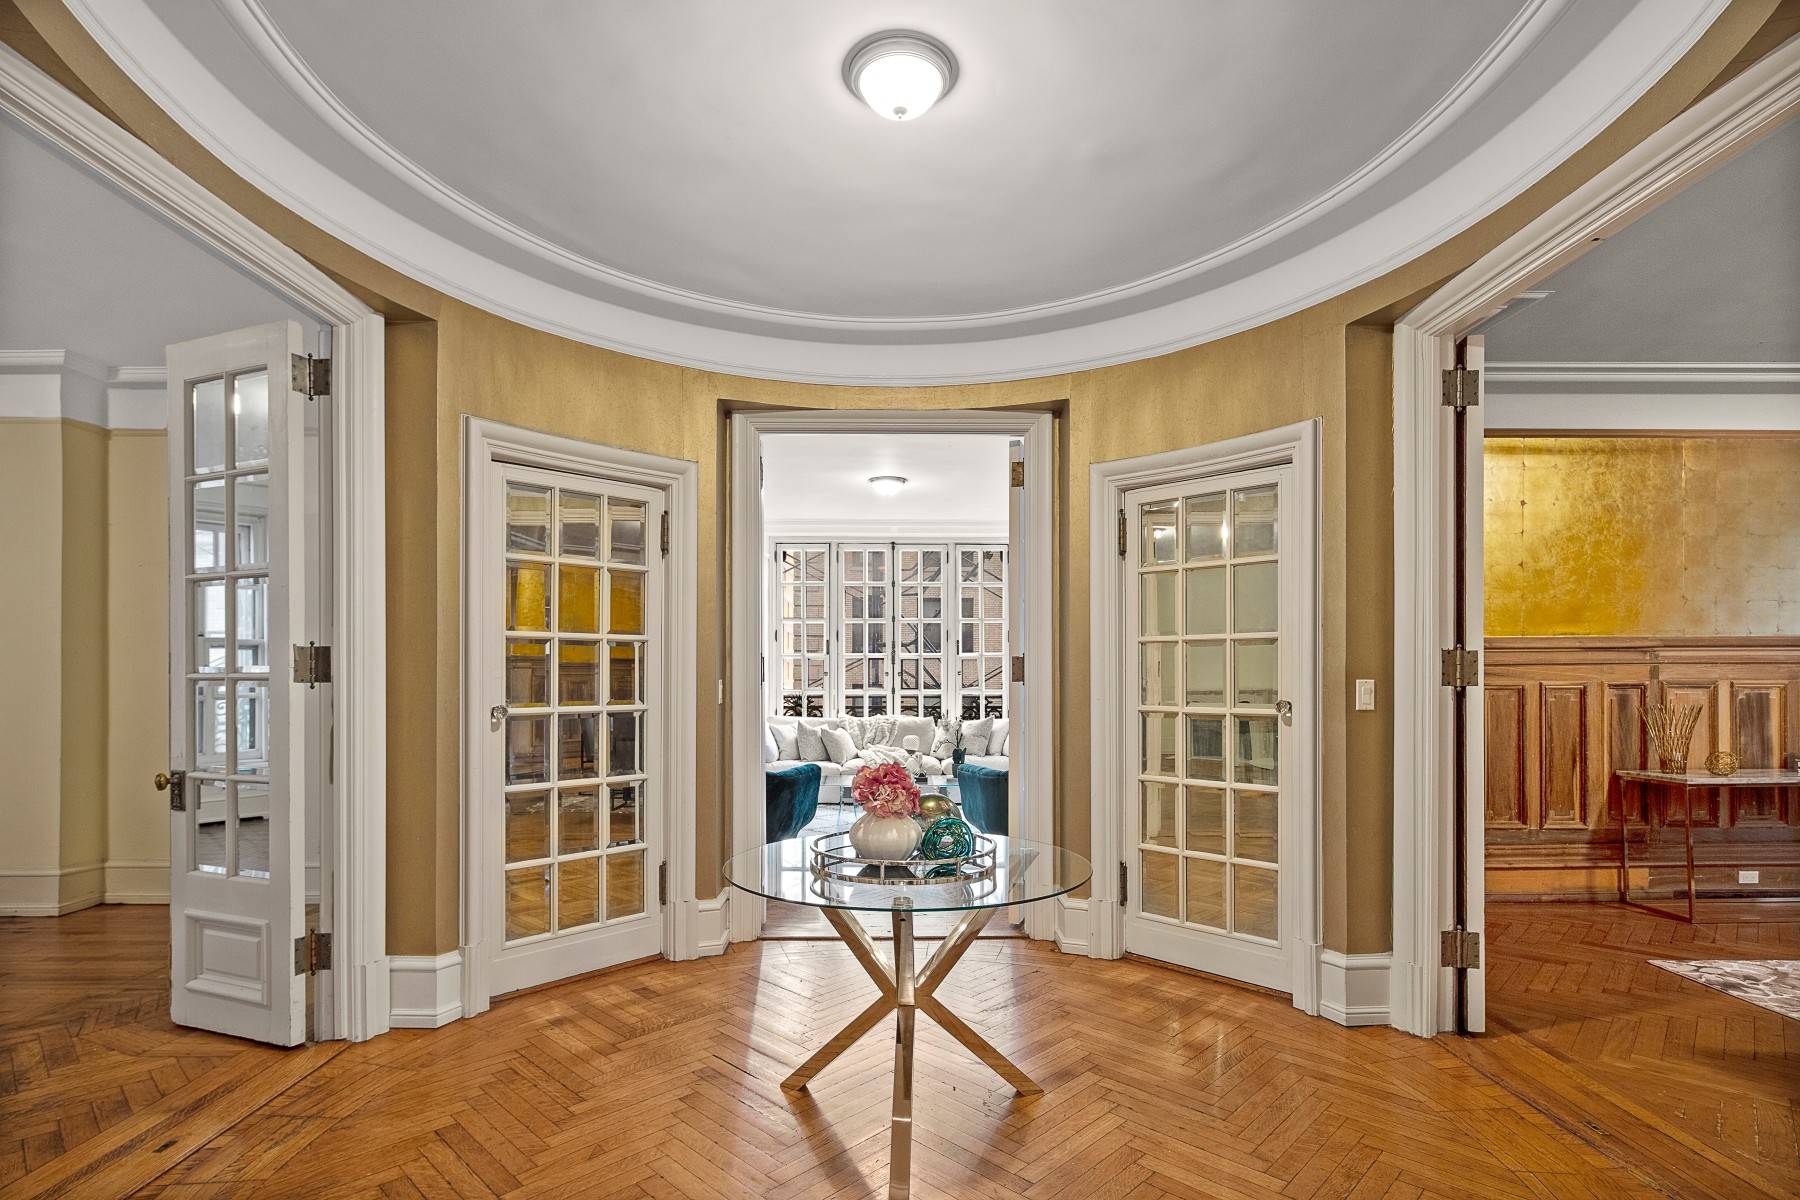 Exquisite four bedroom apartment in New York Citys iconic Ansonia building, an elite luxury residence on the Upper West Side once dubbed The Grandest Hotel in Manhattan.